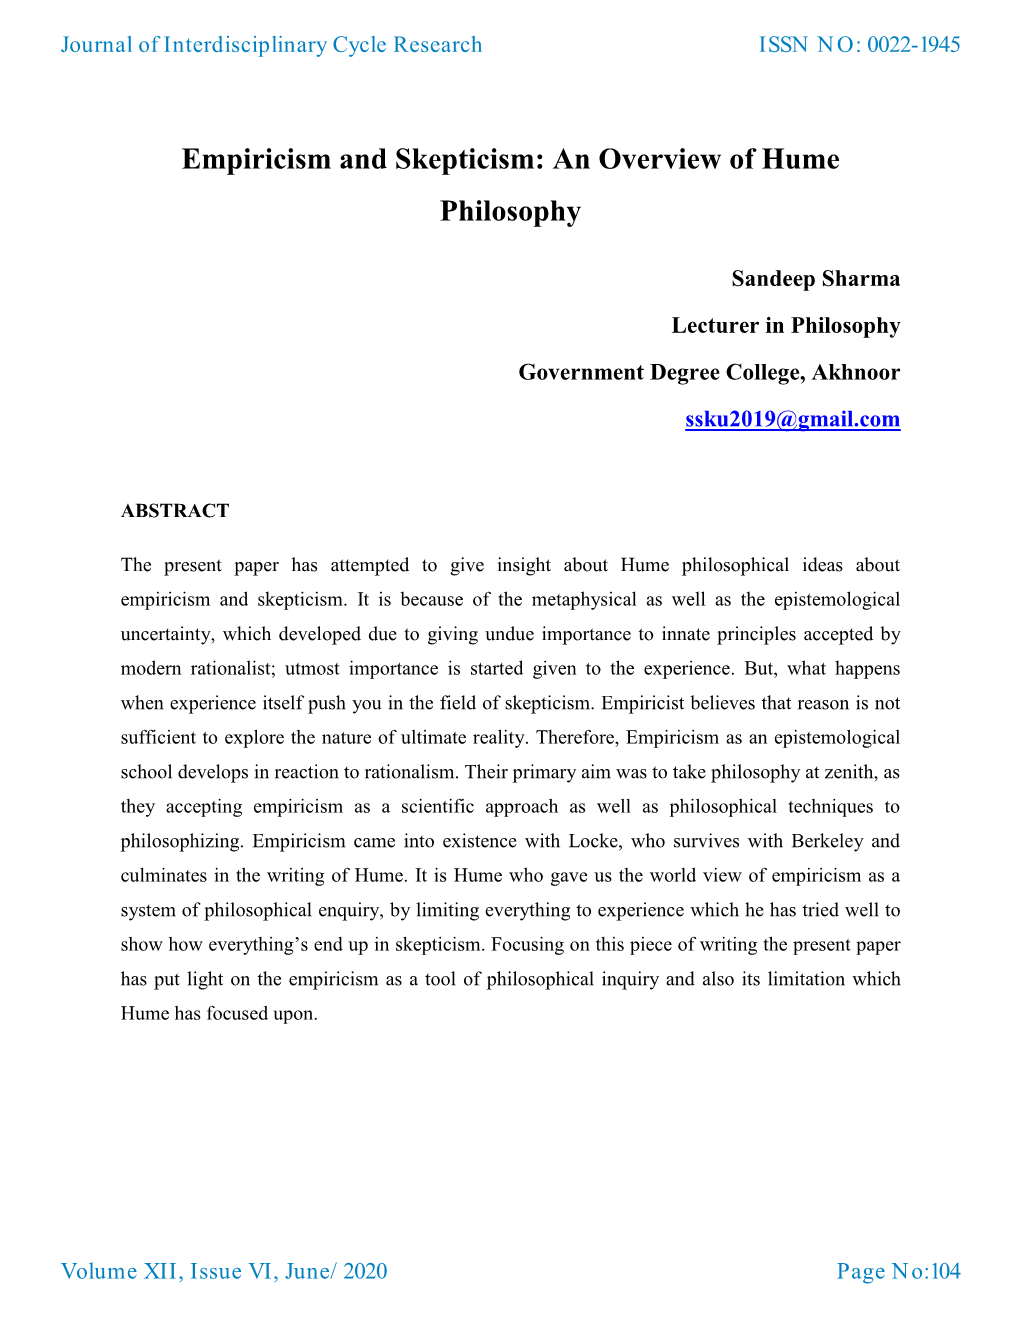 Empiricism and Skepticism: an Overview of Hume Philosophy